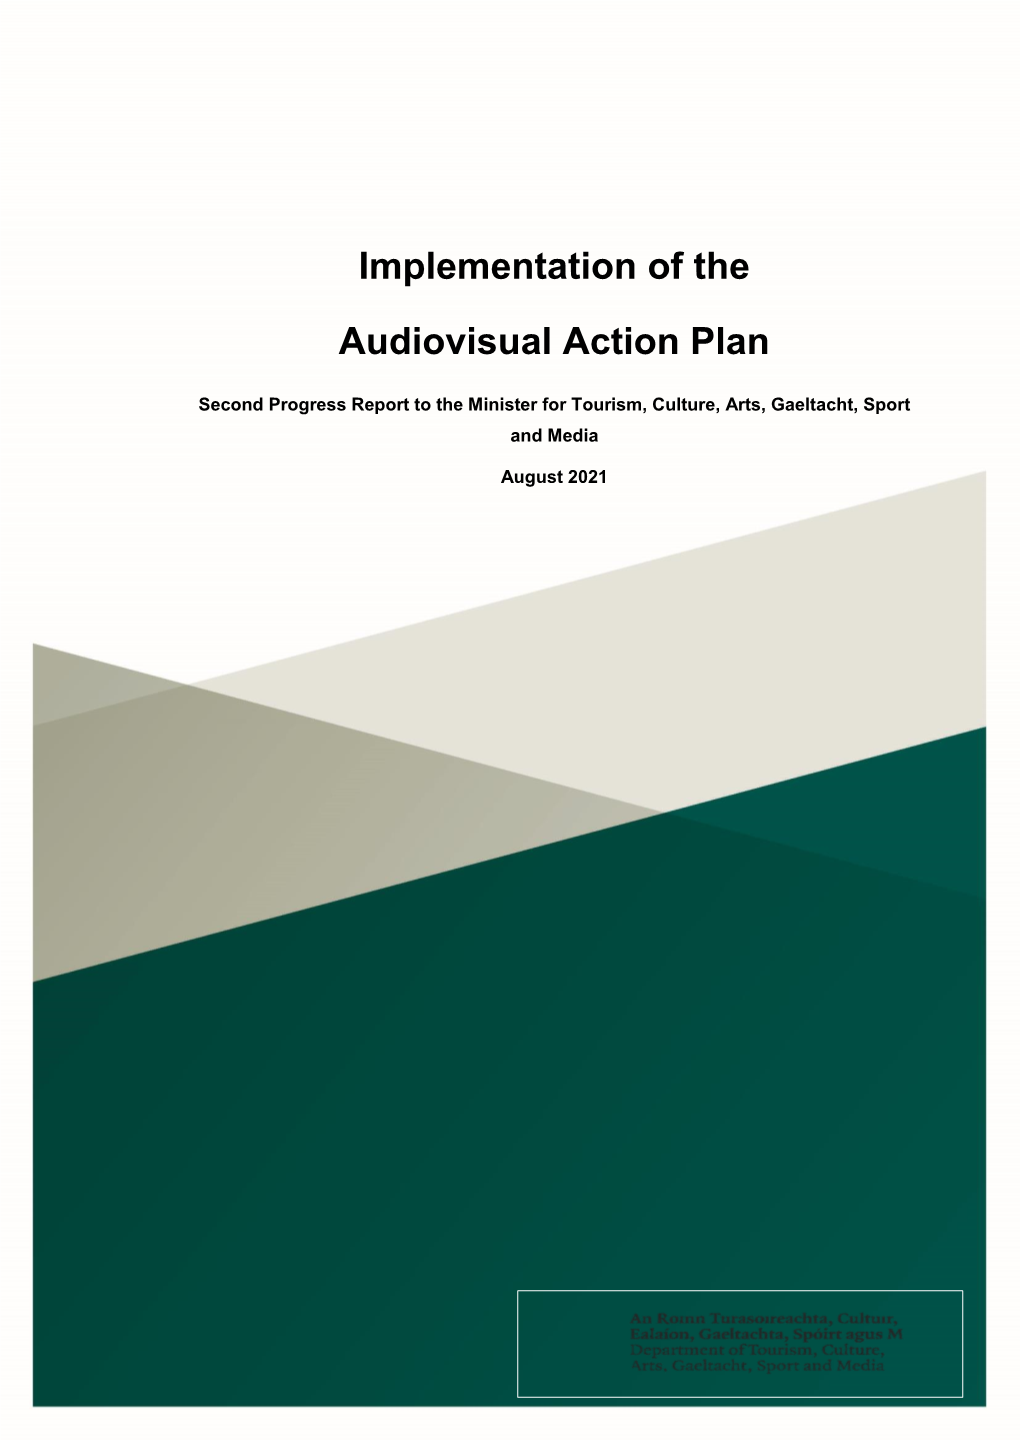 Implementation of the Audiovisual Action Plan3, Was Published in 2019